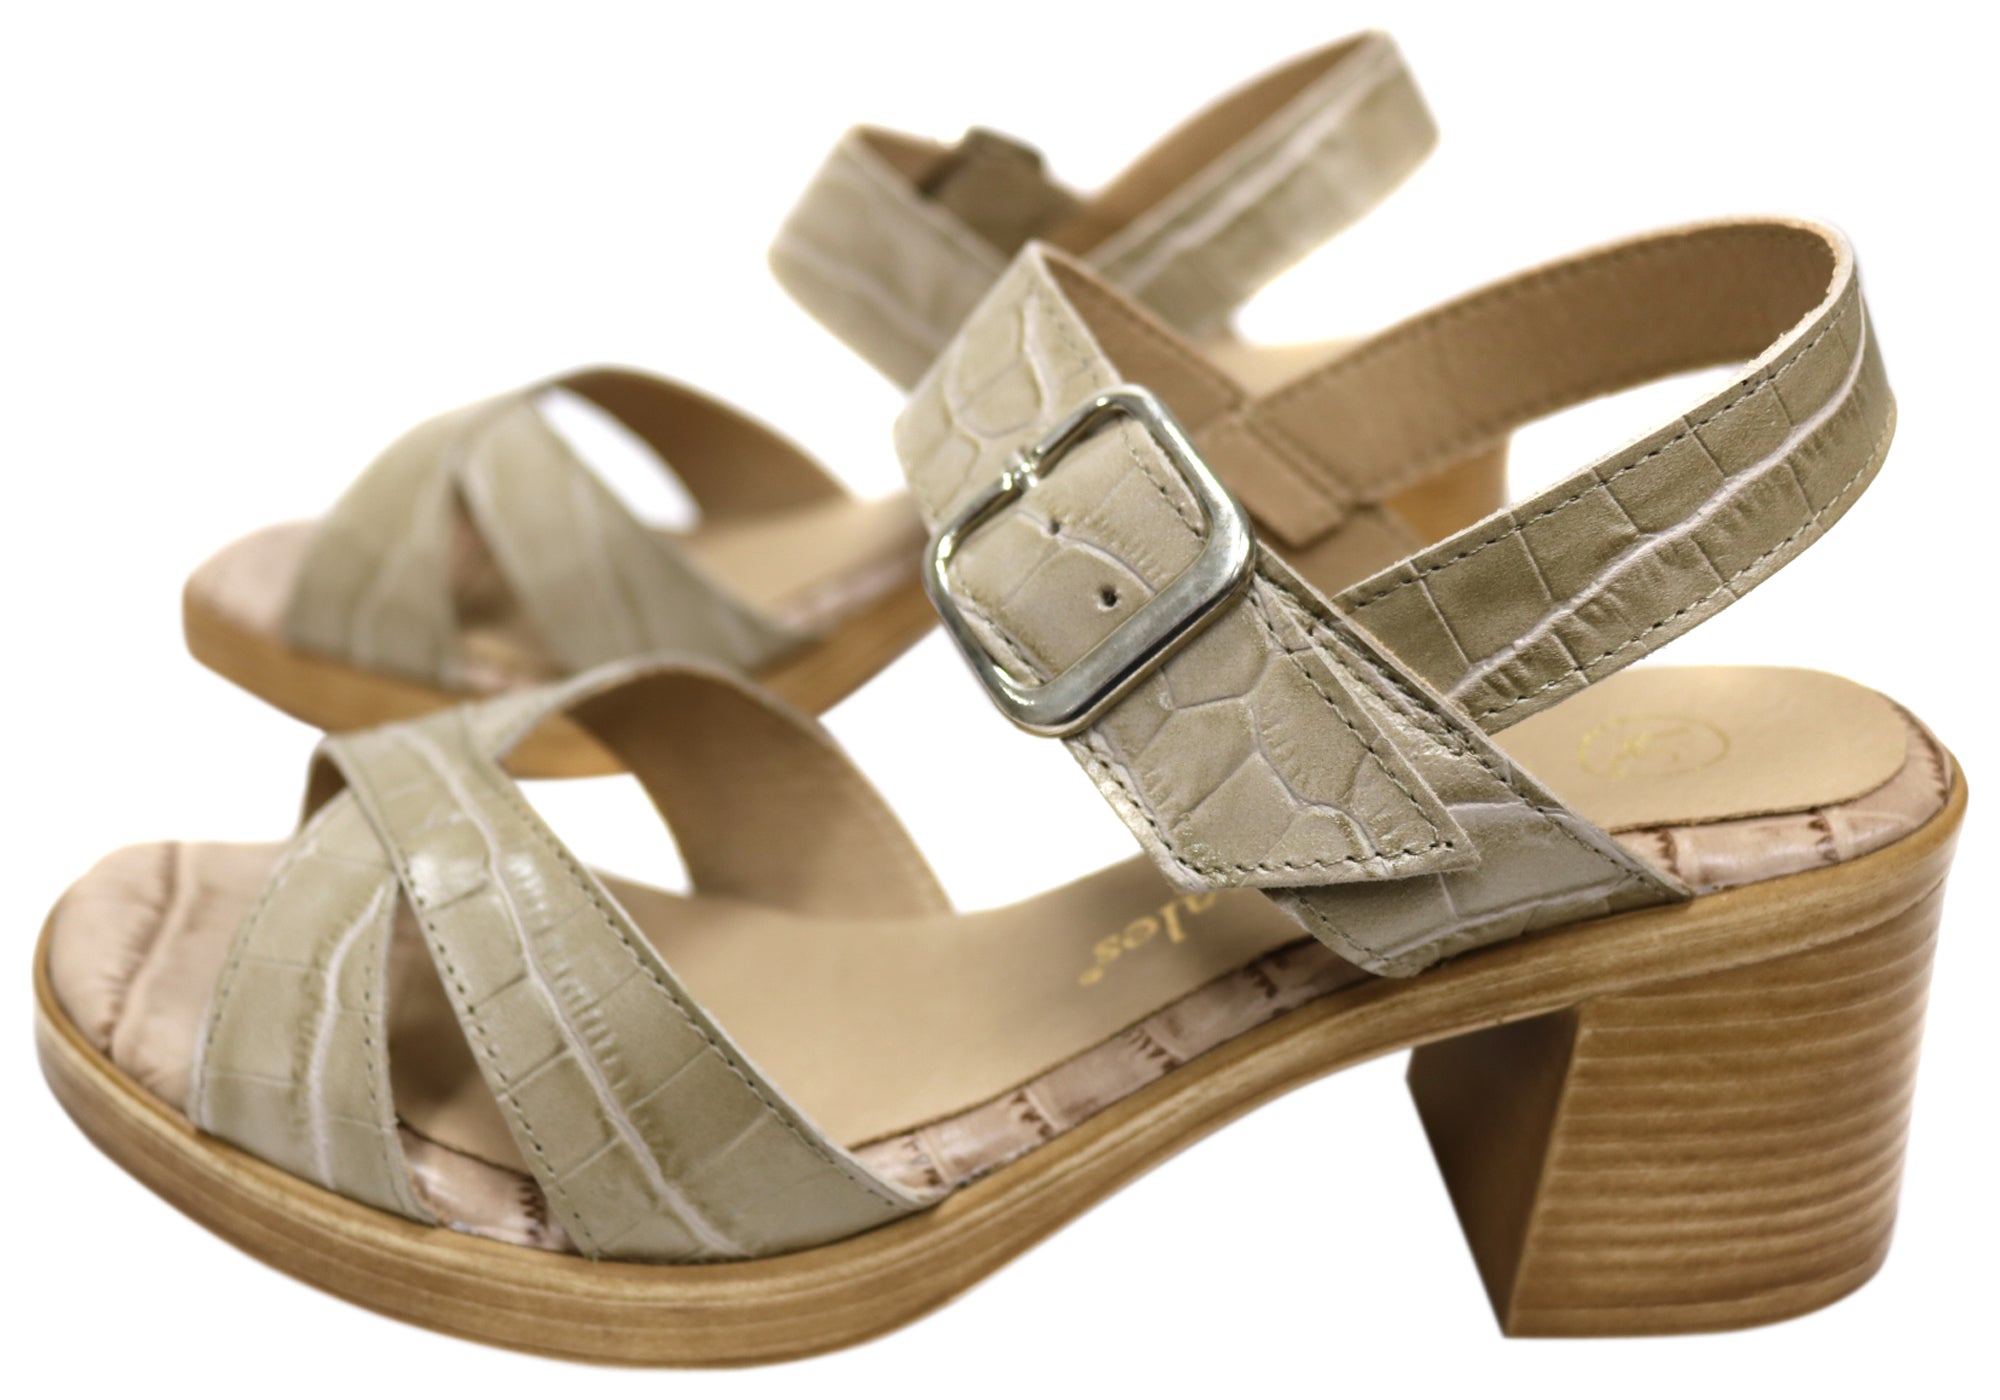 Lola Canales Rose Womens Comfort Leather Sandals Heels Made In Spain